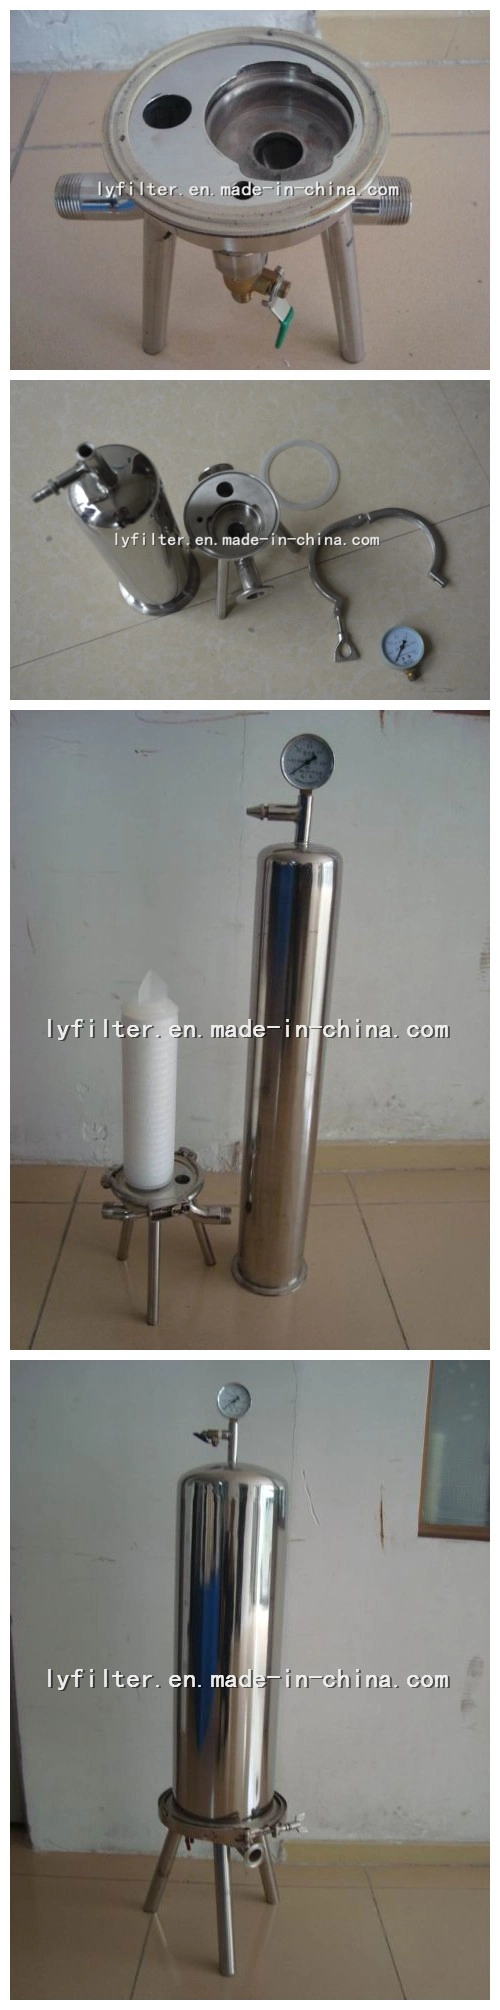 Wine Liquid Filter Stainless Steel Filter Housing for Filter Elements